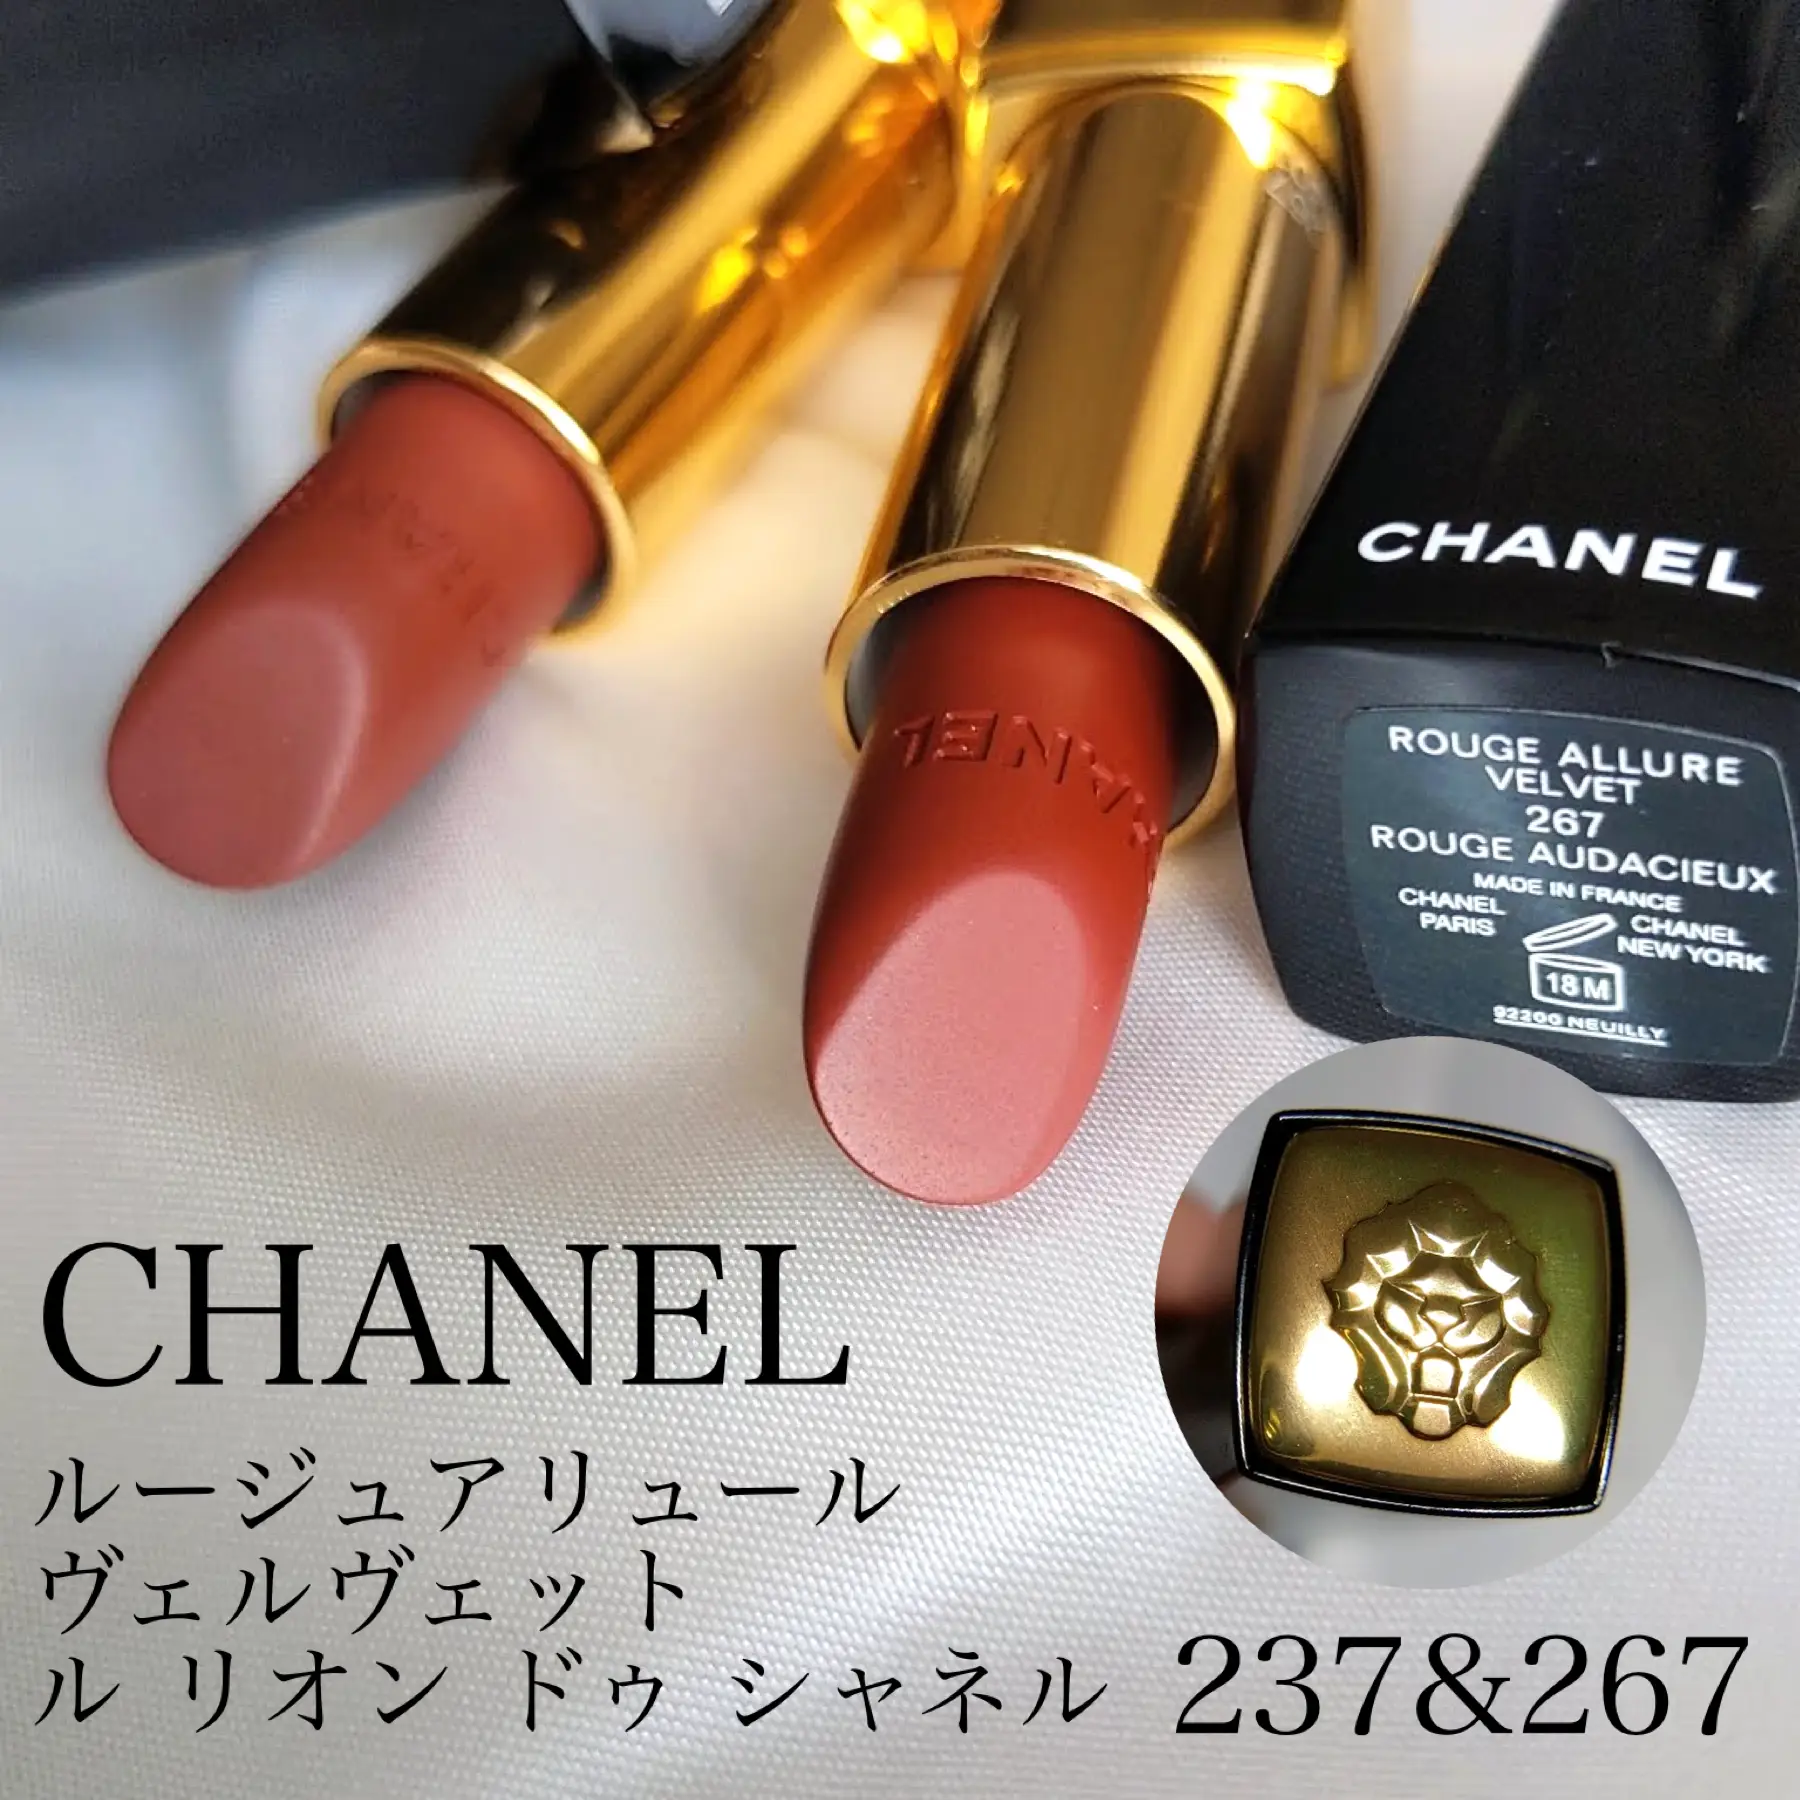 Chanel Rouge Allure Velvet Le Lion de Chanel, Gallery posted by のぶみ